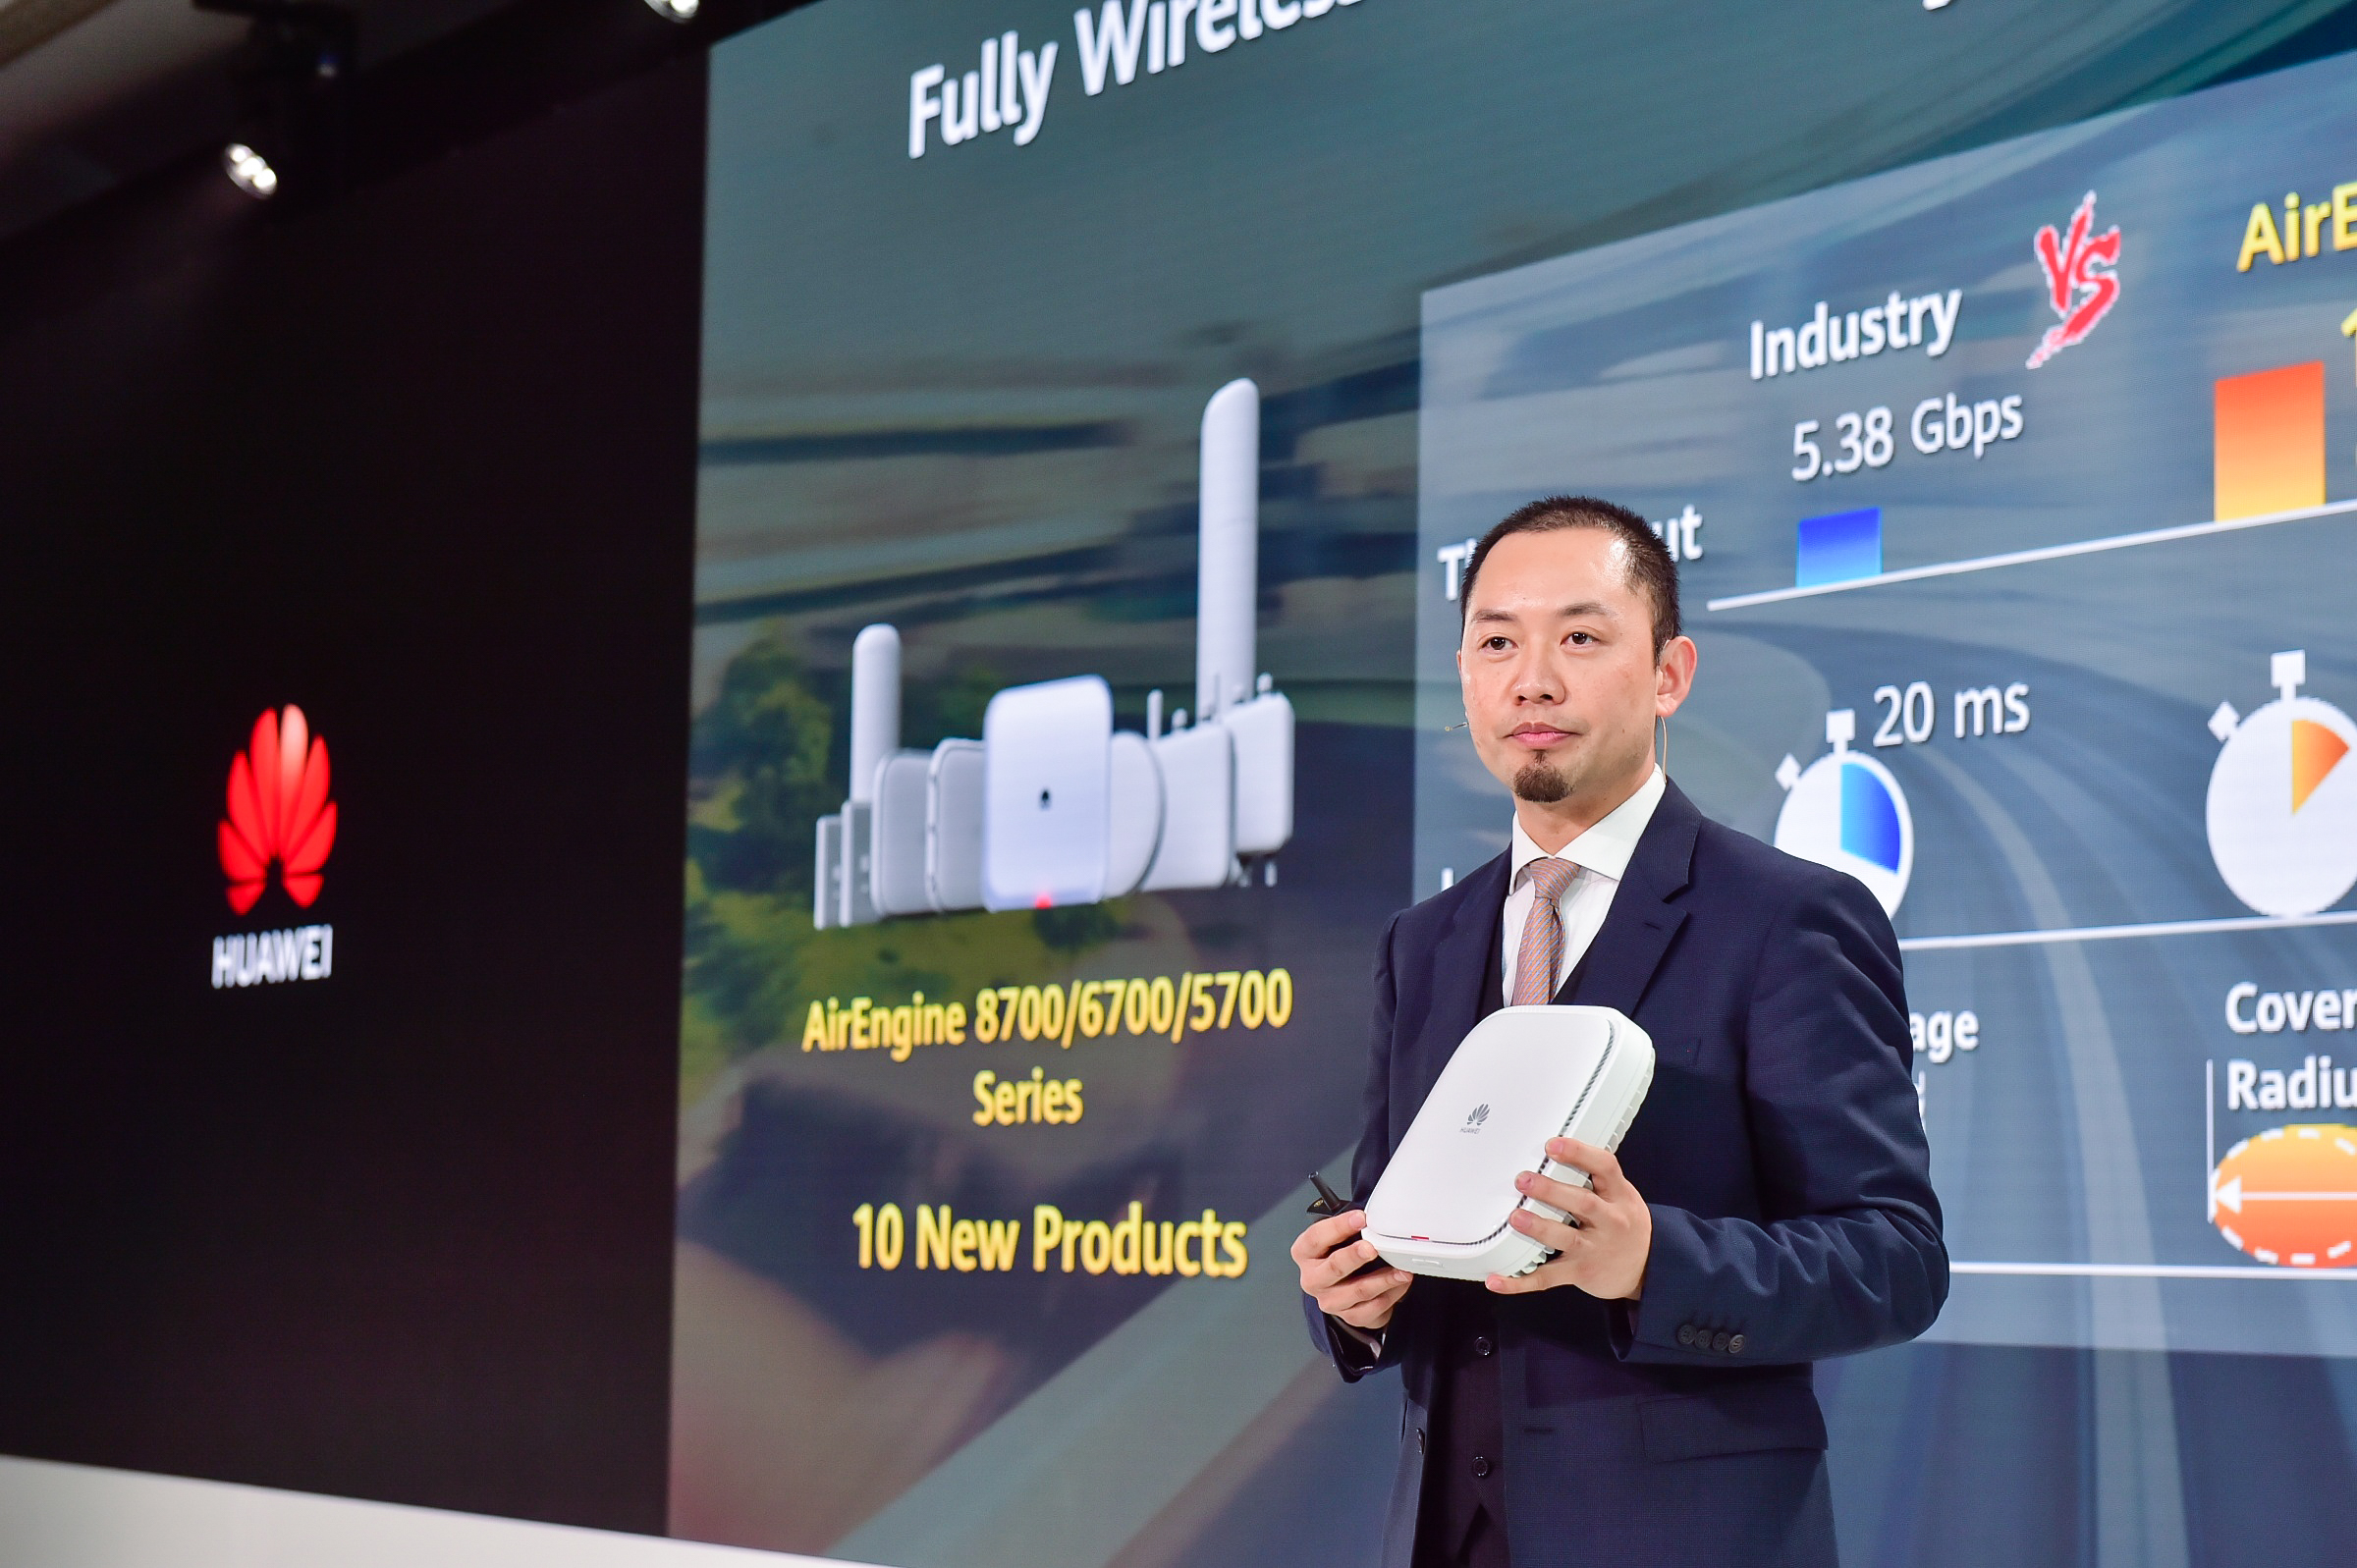 Huawei Launches HiCampus Solution Globally Enterprises Now Have Access to Fully Wireless, Optical, and Intelligent Network Services across Campuses